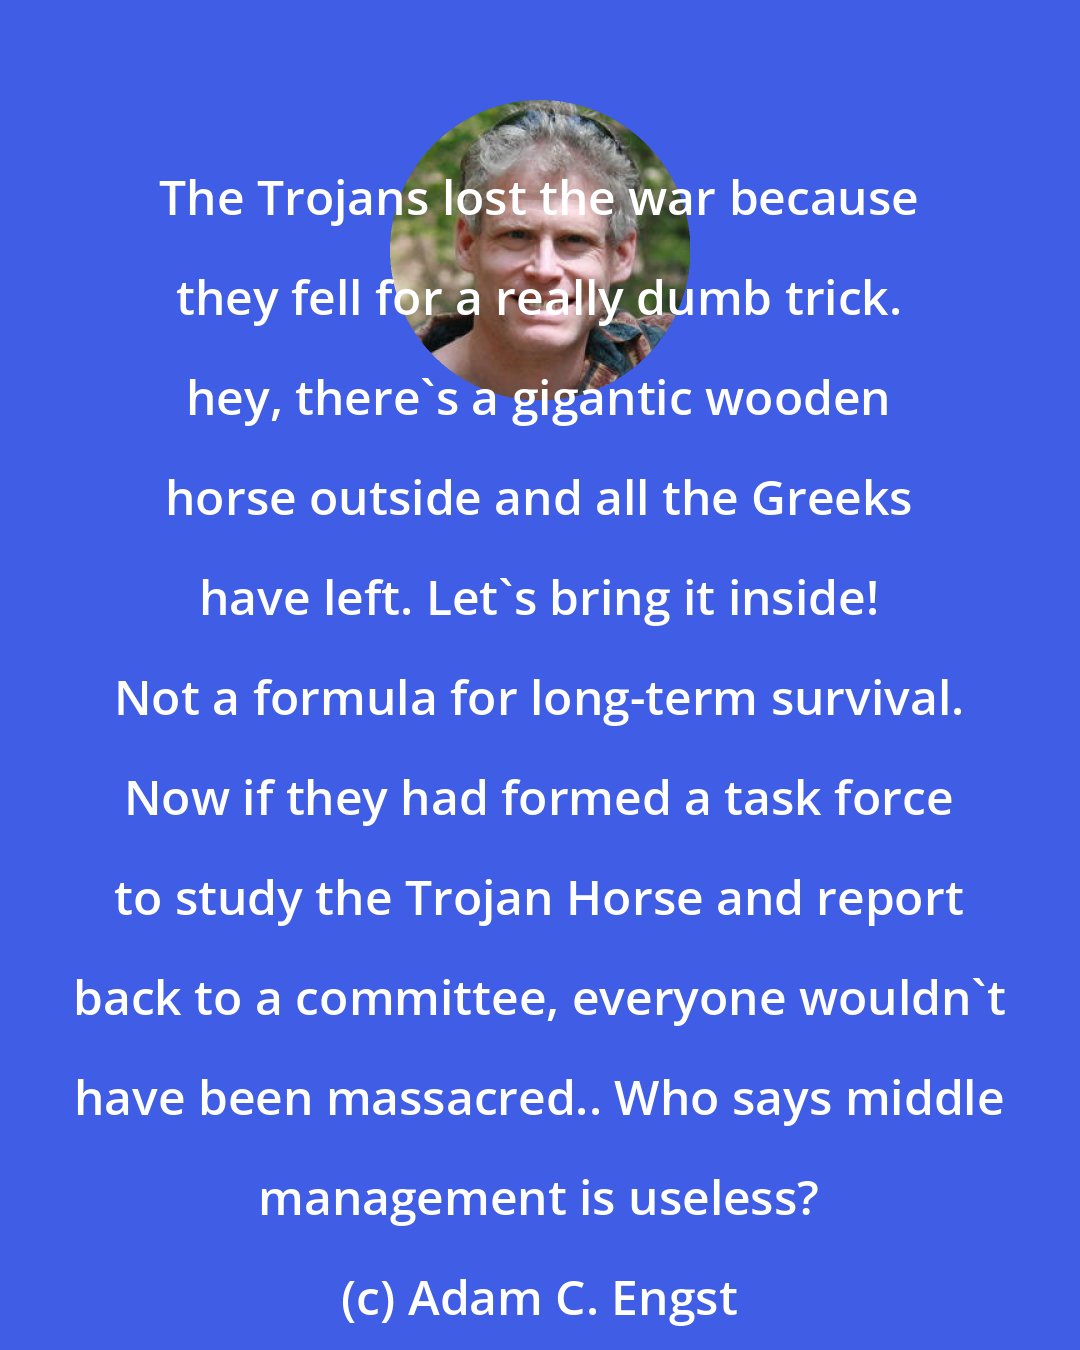 Adam C. Engst: The Trojans lost the war because they fell for a really dumb trick. hey, there's a gigantic wooden horse outside and all the Greeks have left. Let's bring it inside! Not a formula for long-term survival. Now if they had formed a task force to study the Trojan Horse and report back to a committee, everyone wouldn't have been massacred.. Who says middle management is useless?